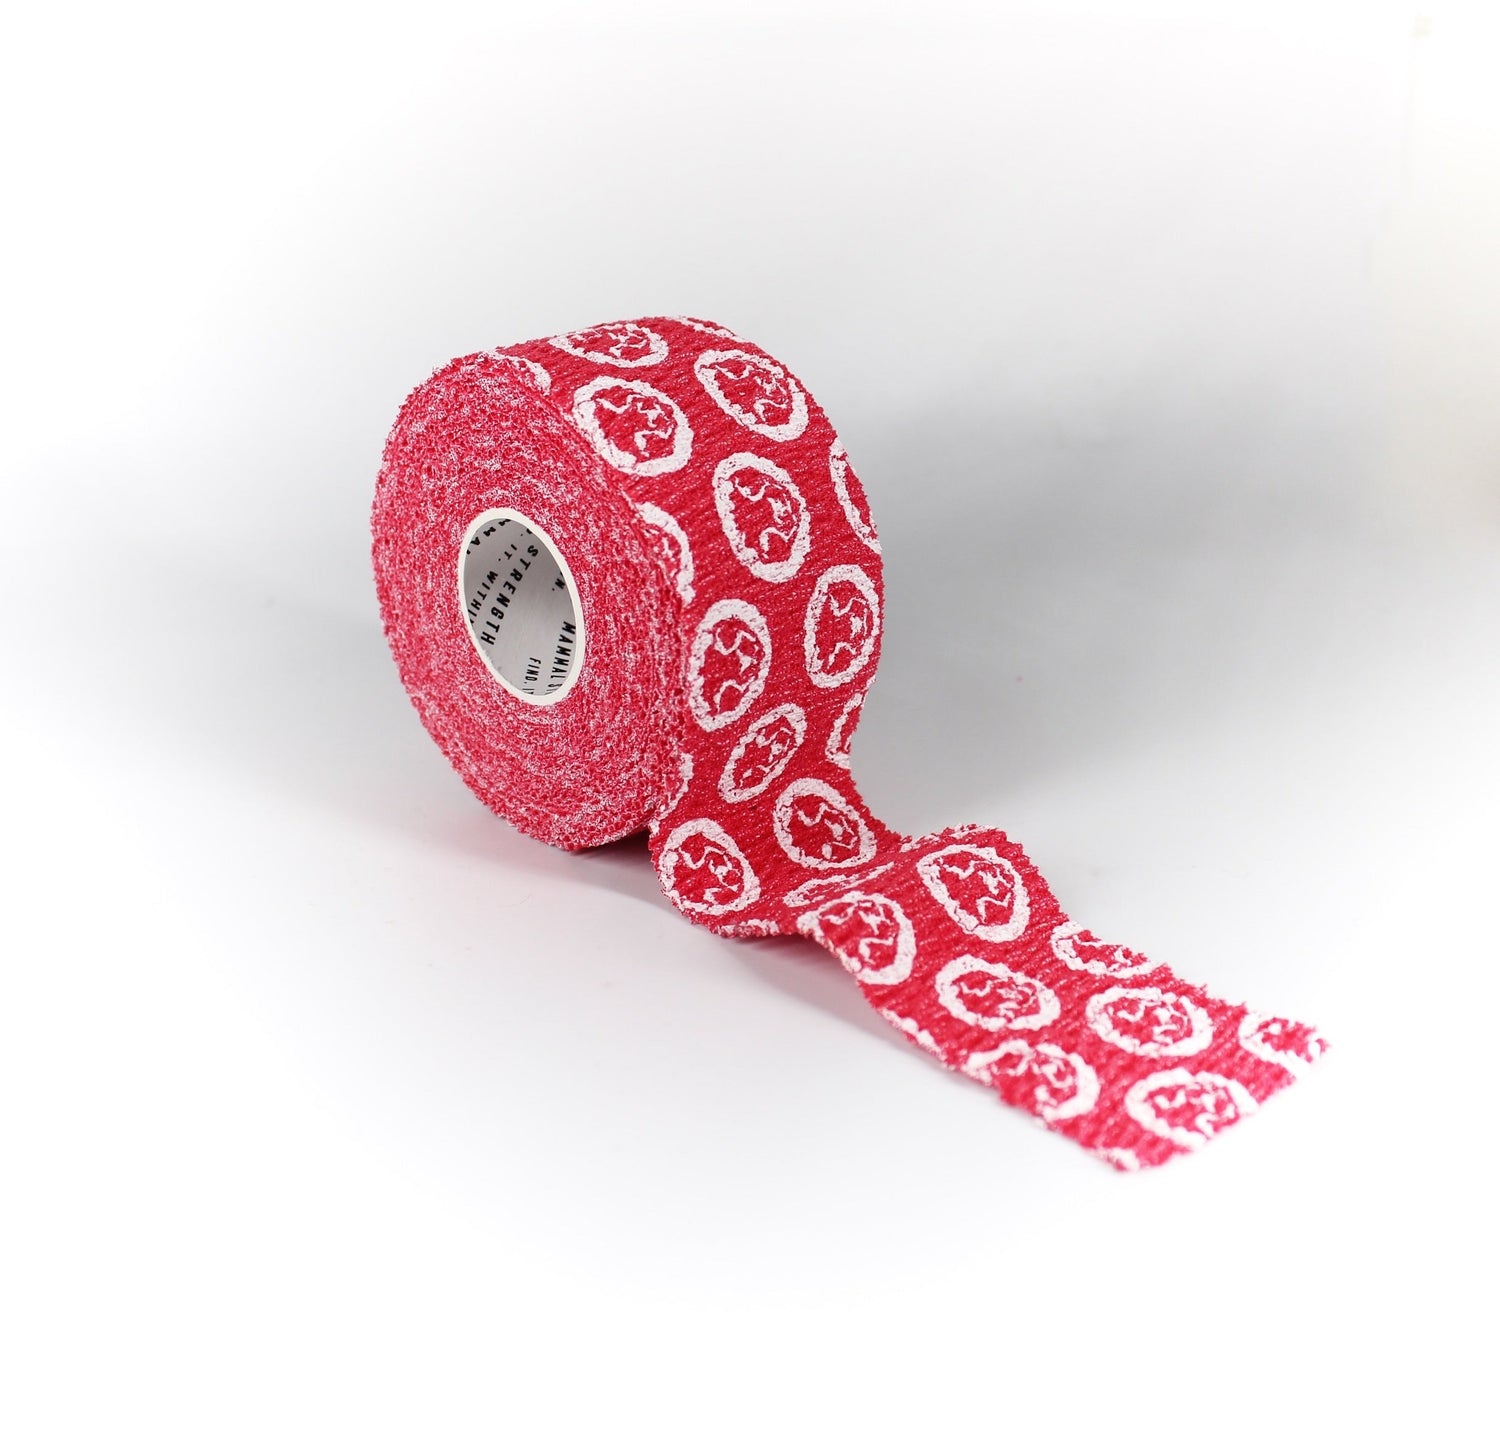 Adhesive Weightlifting Tape - Red